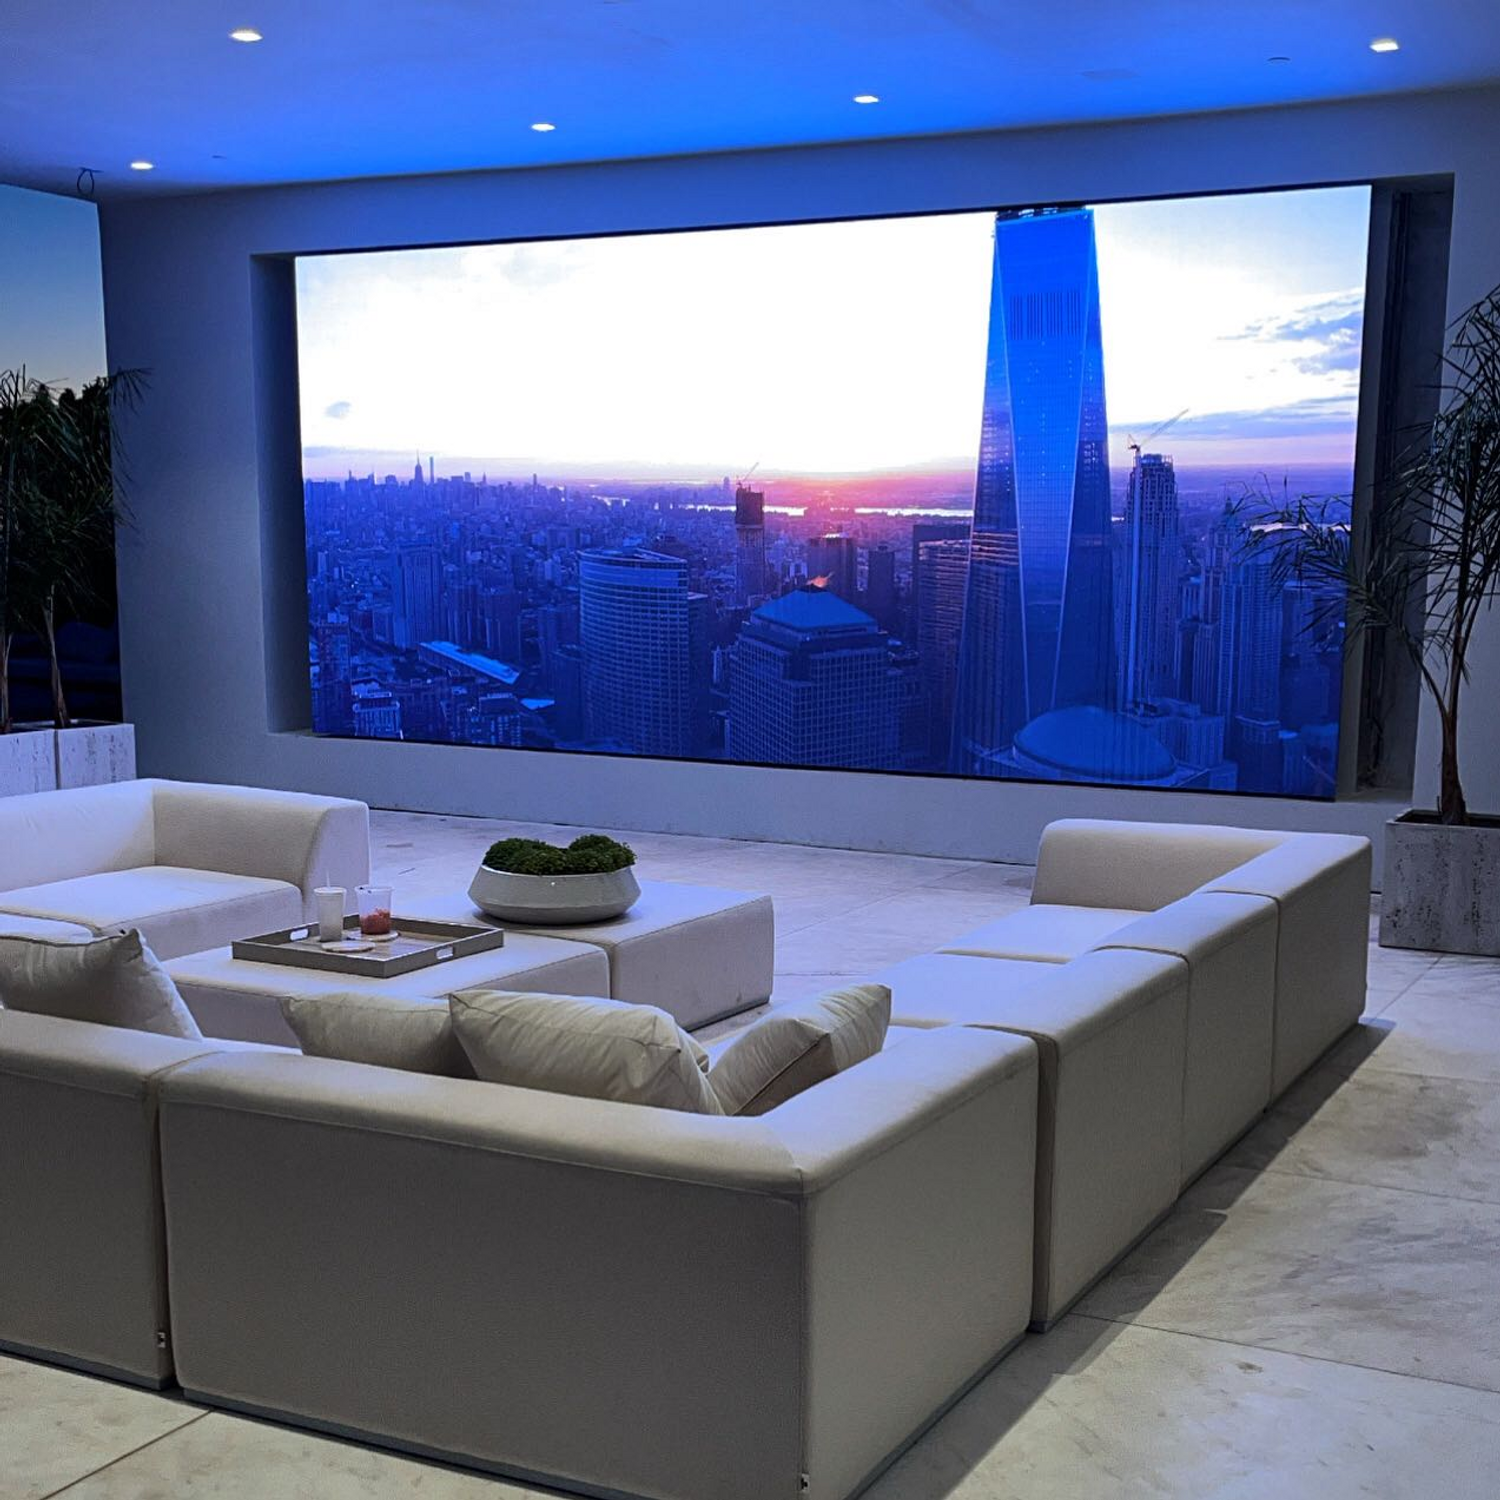 Luxurious indoor setting featuring a wall-sized 4K P125 LED display